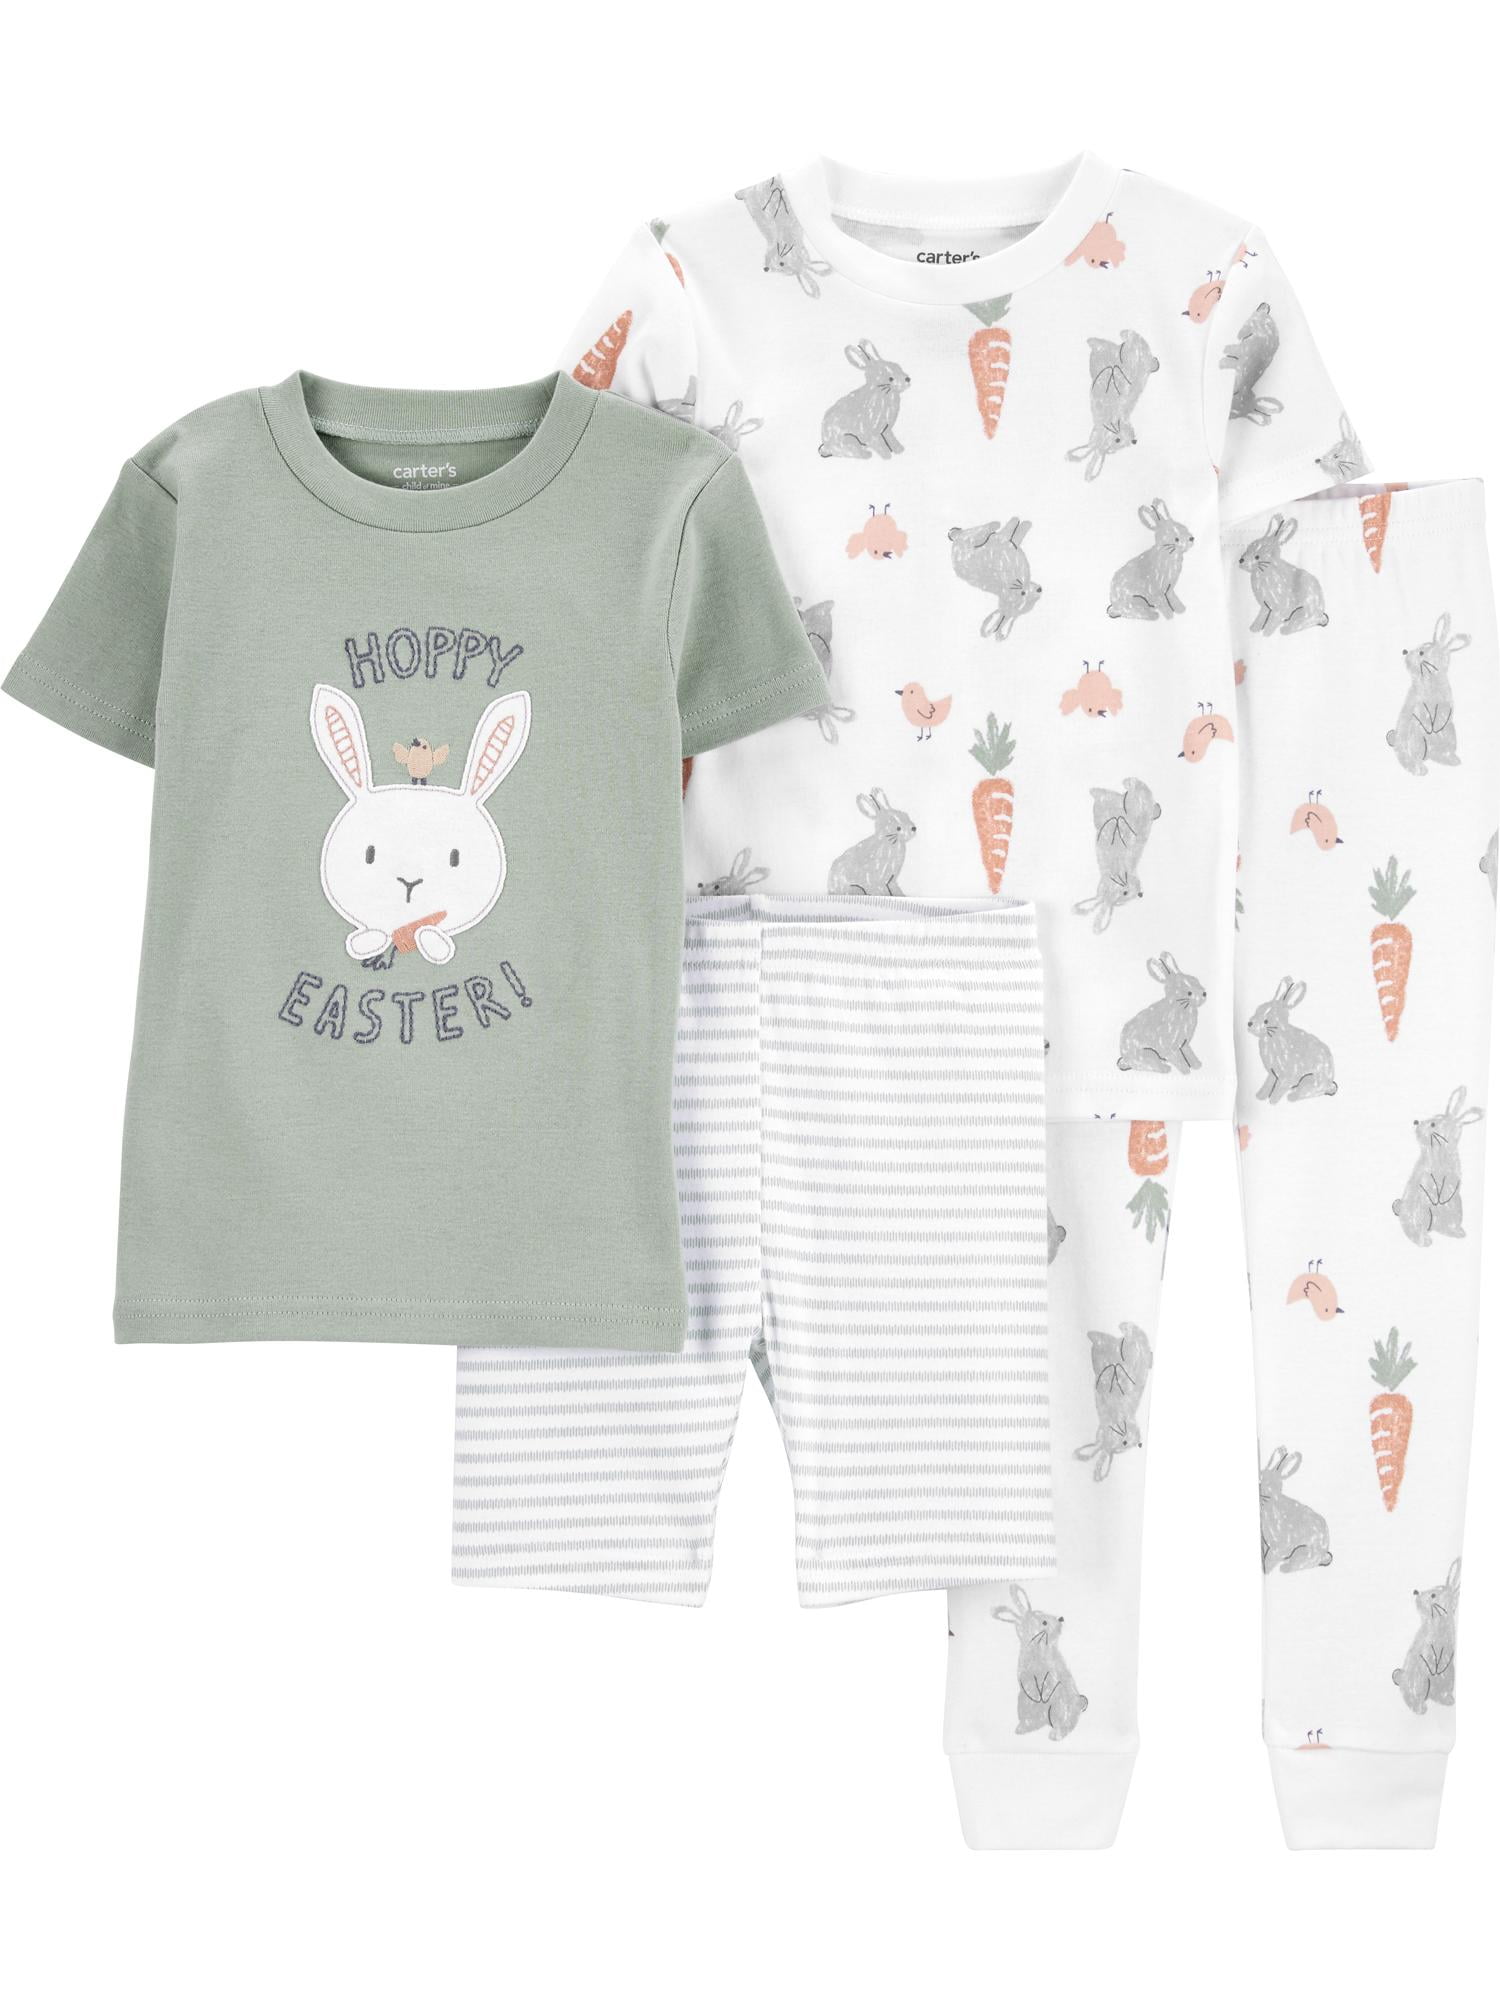 Carter's Child of Mine Baby and Toddler Unisex Easter Pajama Set, 4-Piece, Sizes 12M-5T - Walmart.com